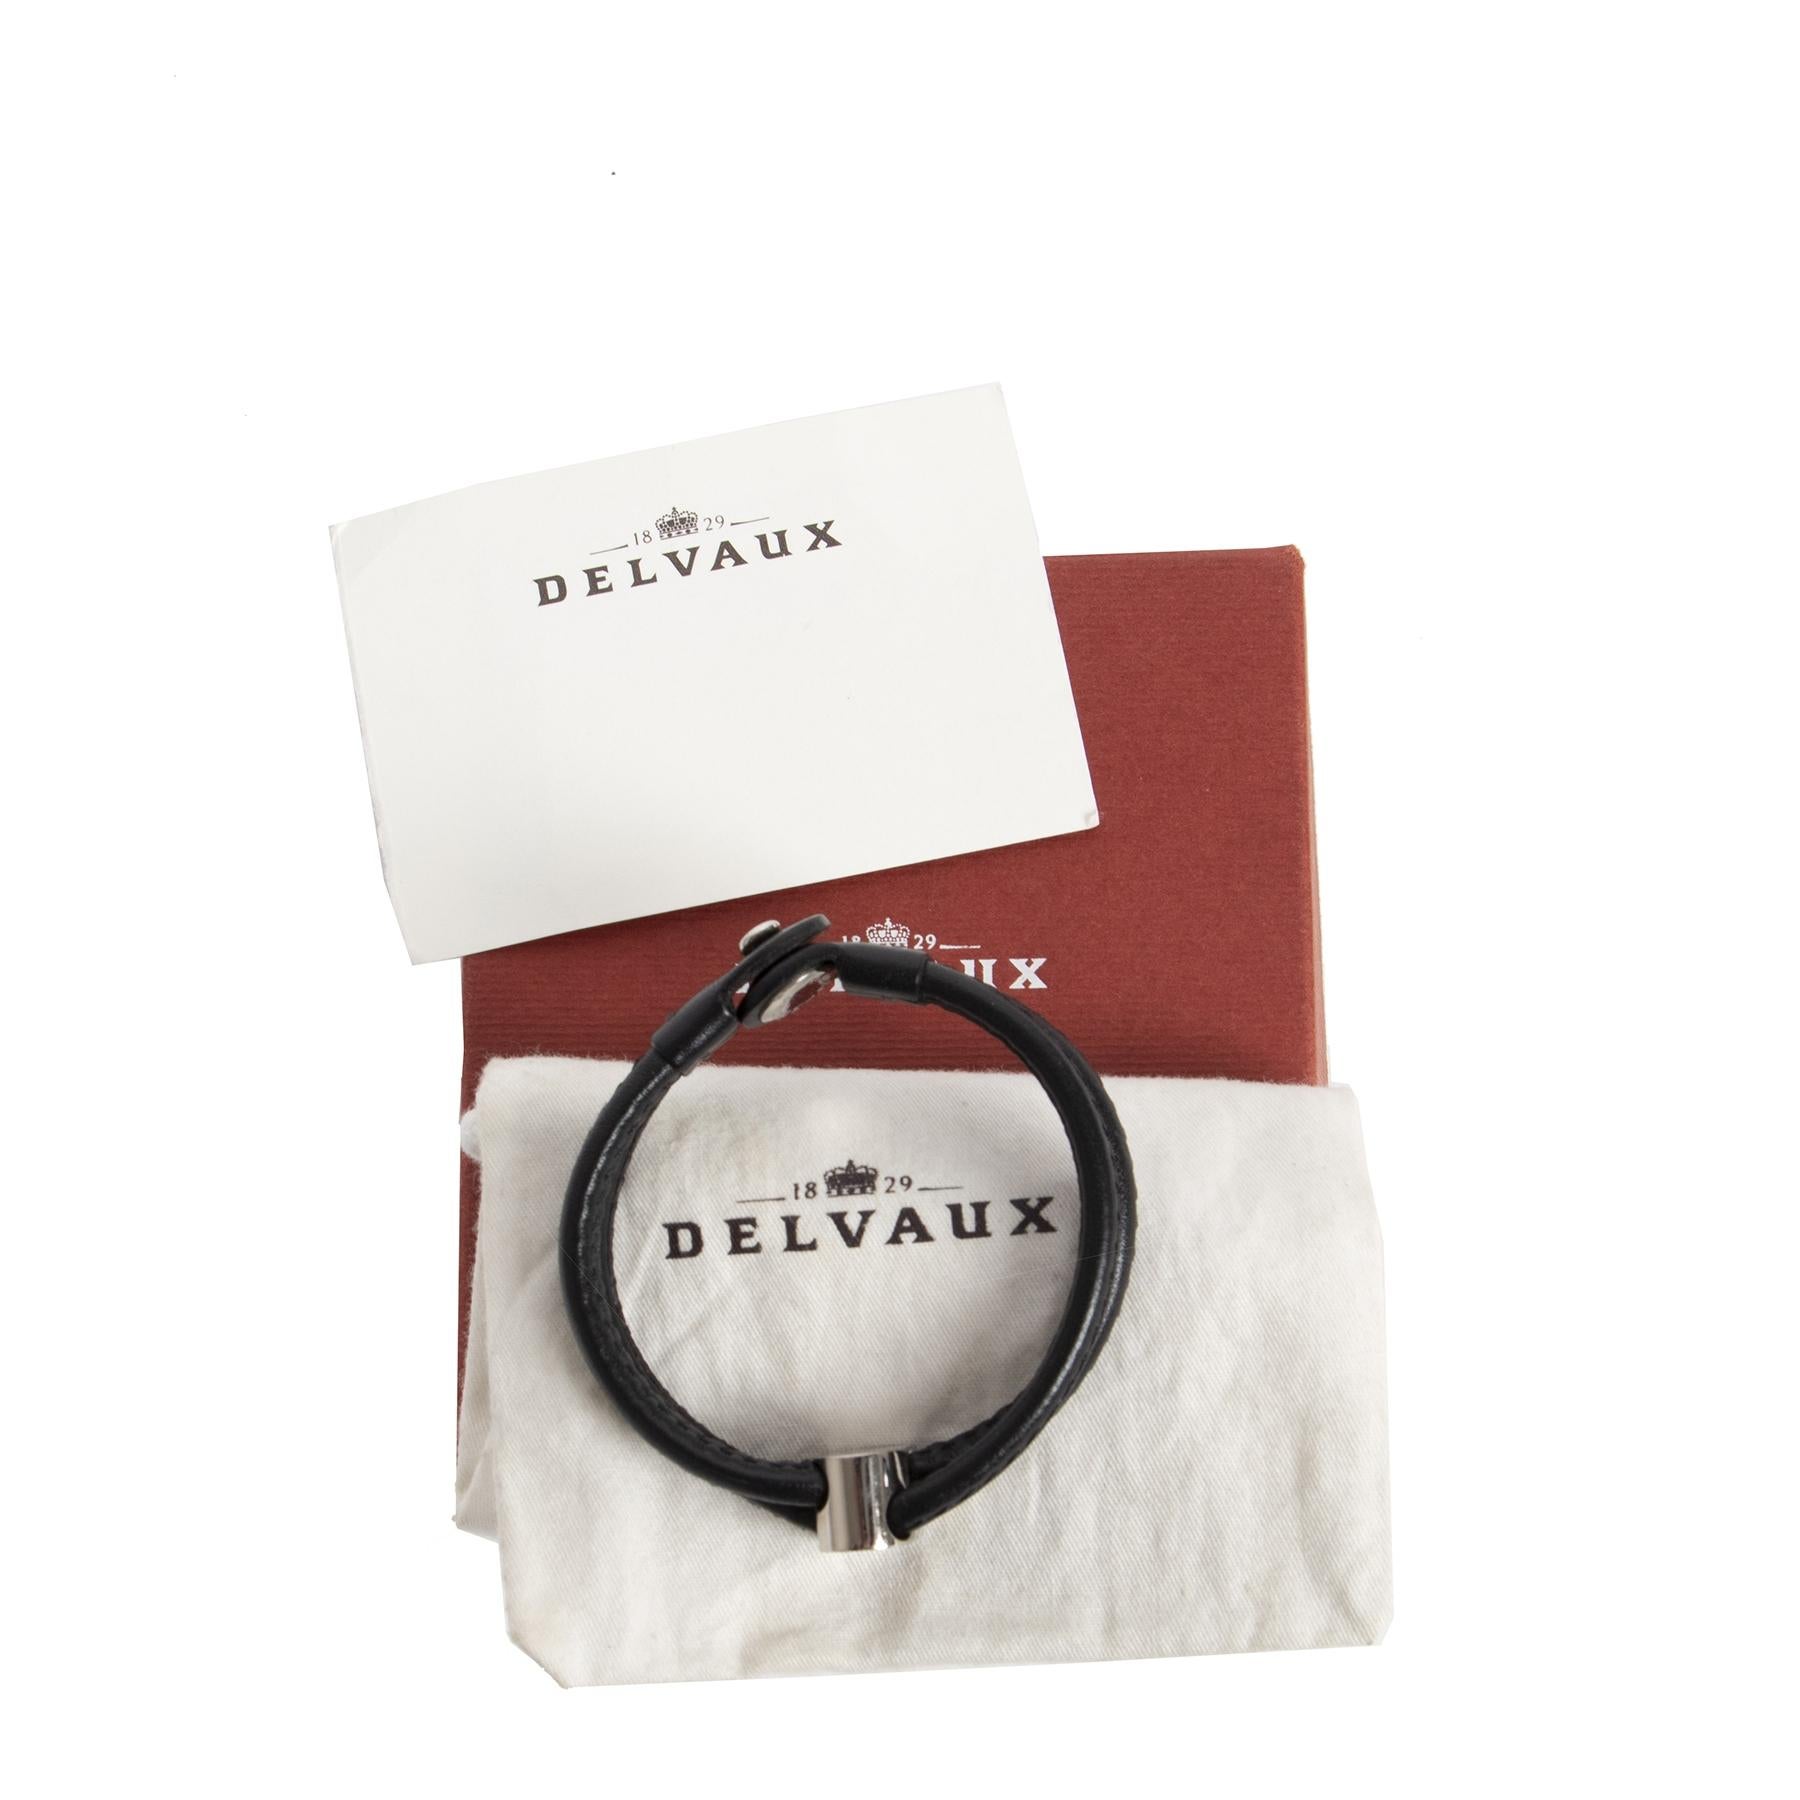 Very good preloved condition

Delvaux Black Leather Bracelet Silver D

This classic bracelet by Delvaux is crafted out of black leather and features the brands signature letter 